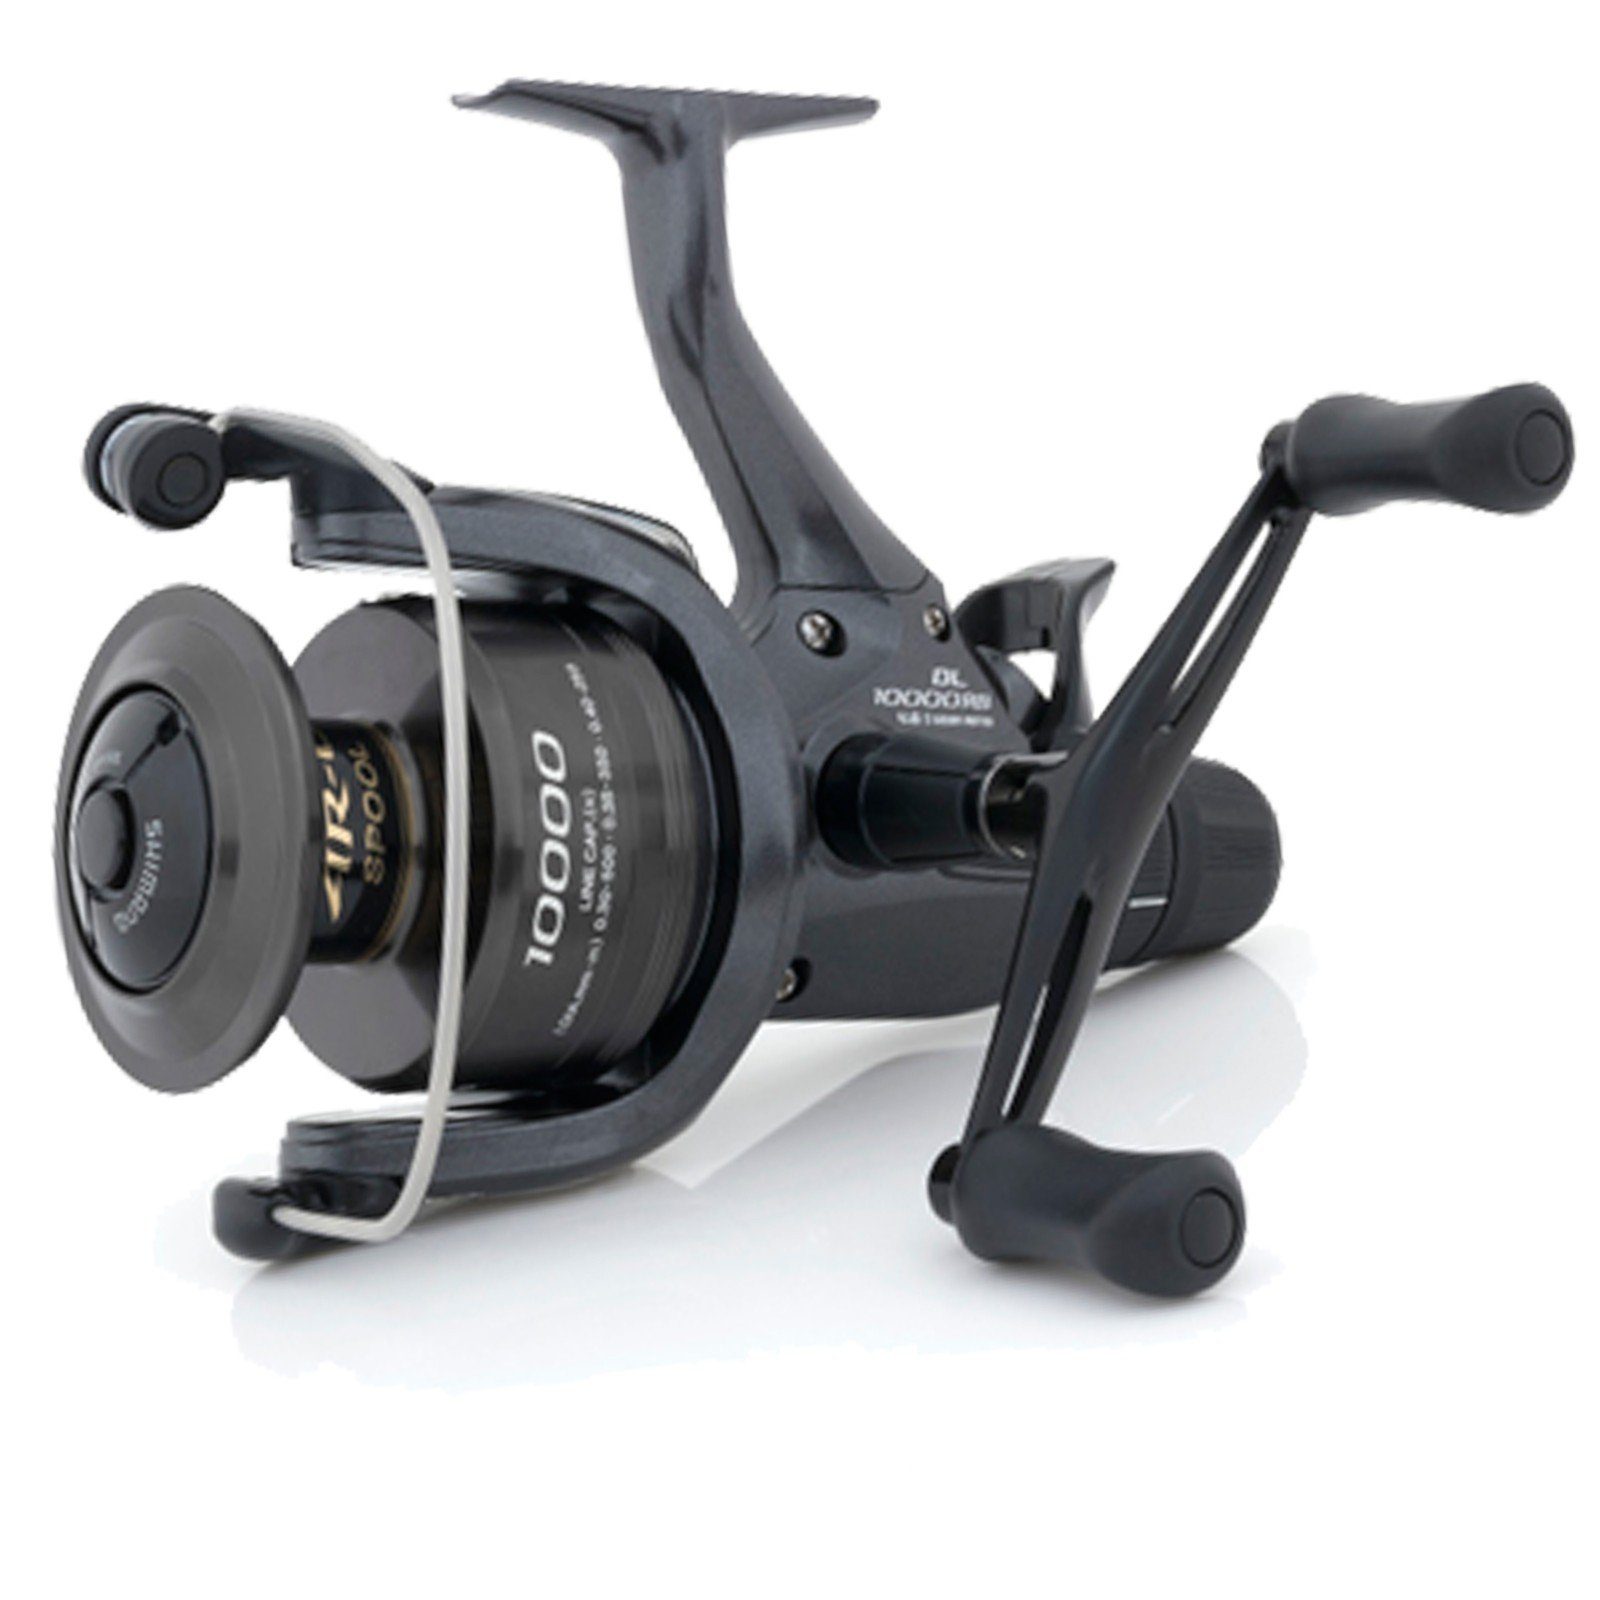 Shimano Freilaufrolle), Shimano Baitrunner DL 6000 RB Freilaufrolle